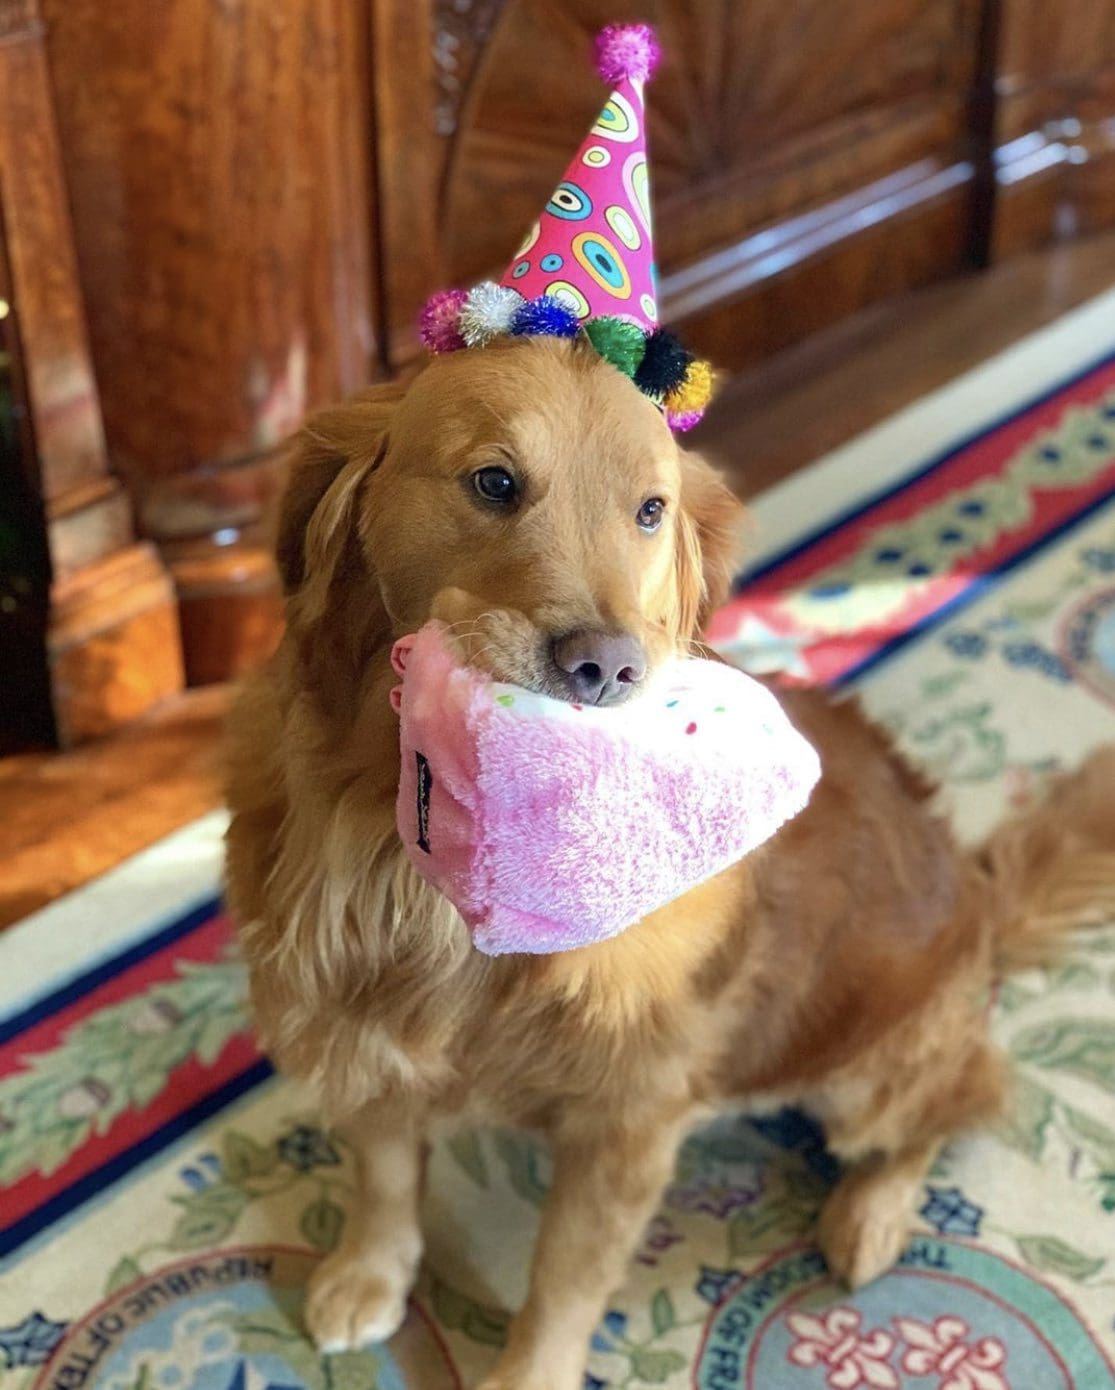 It's Pancake's birthday. The First Dog of Texas